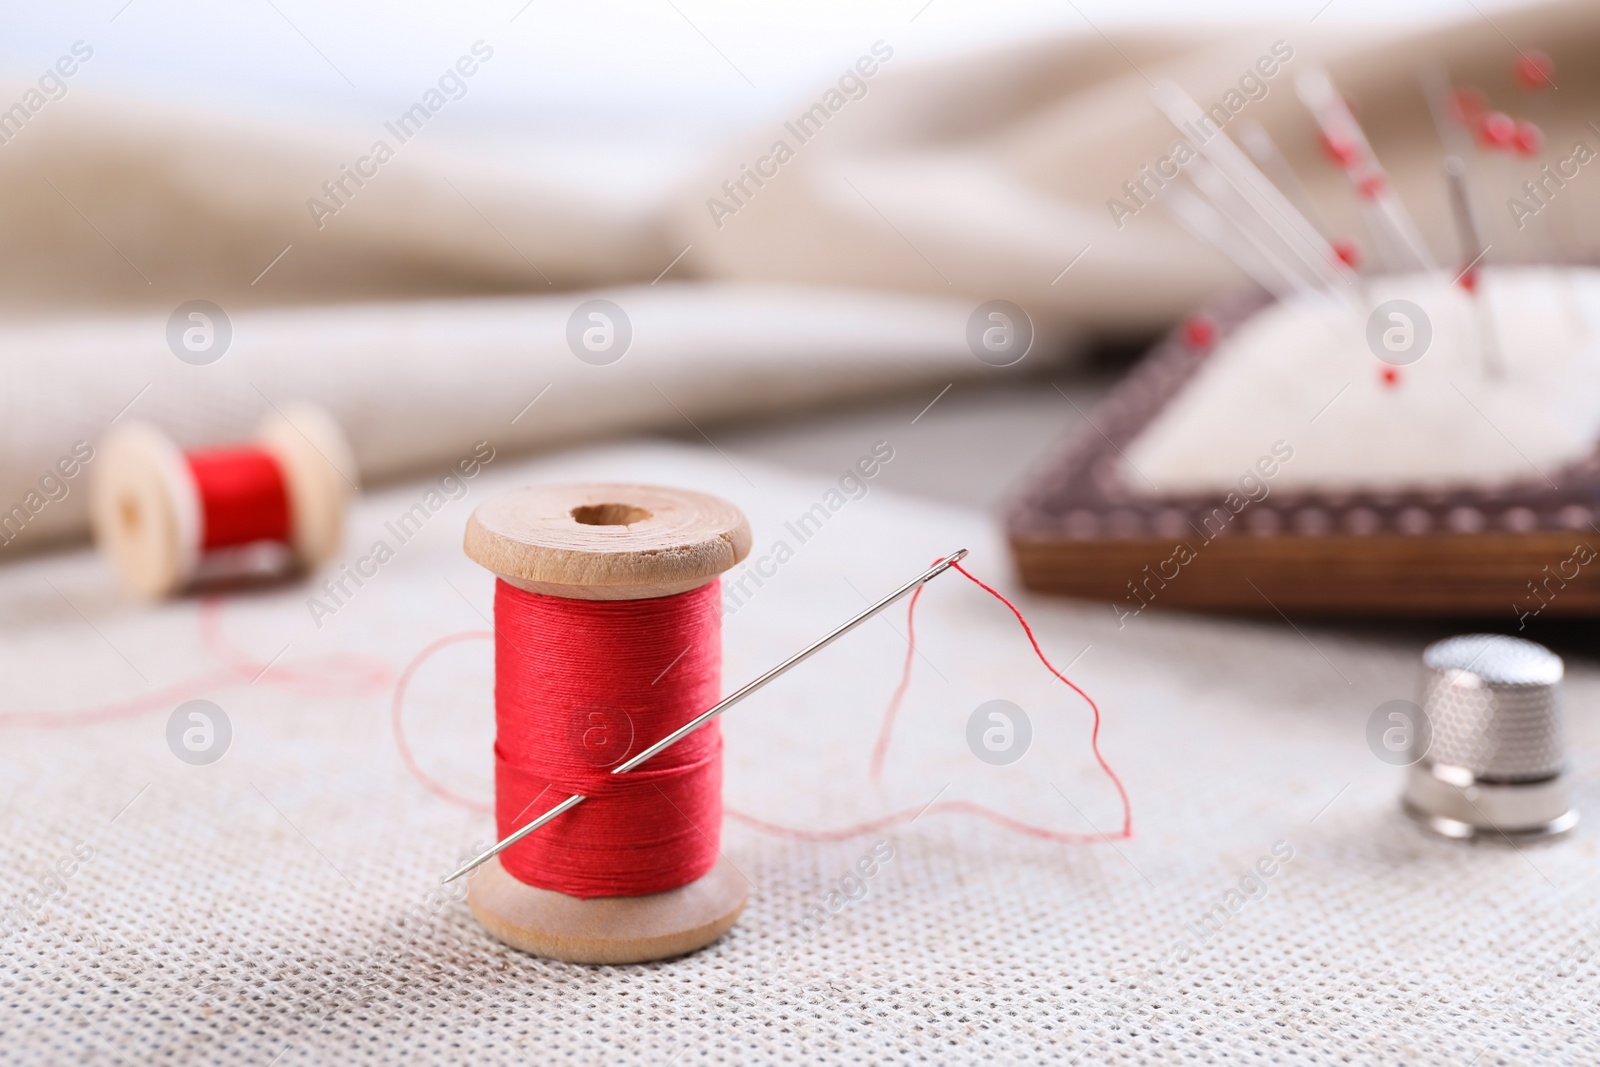 Photo of Spool of red sewing thread with needle on white fabric